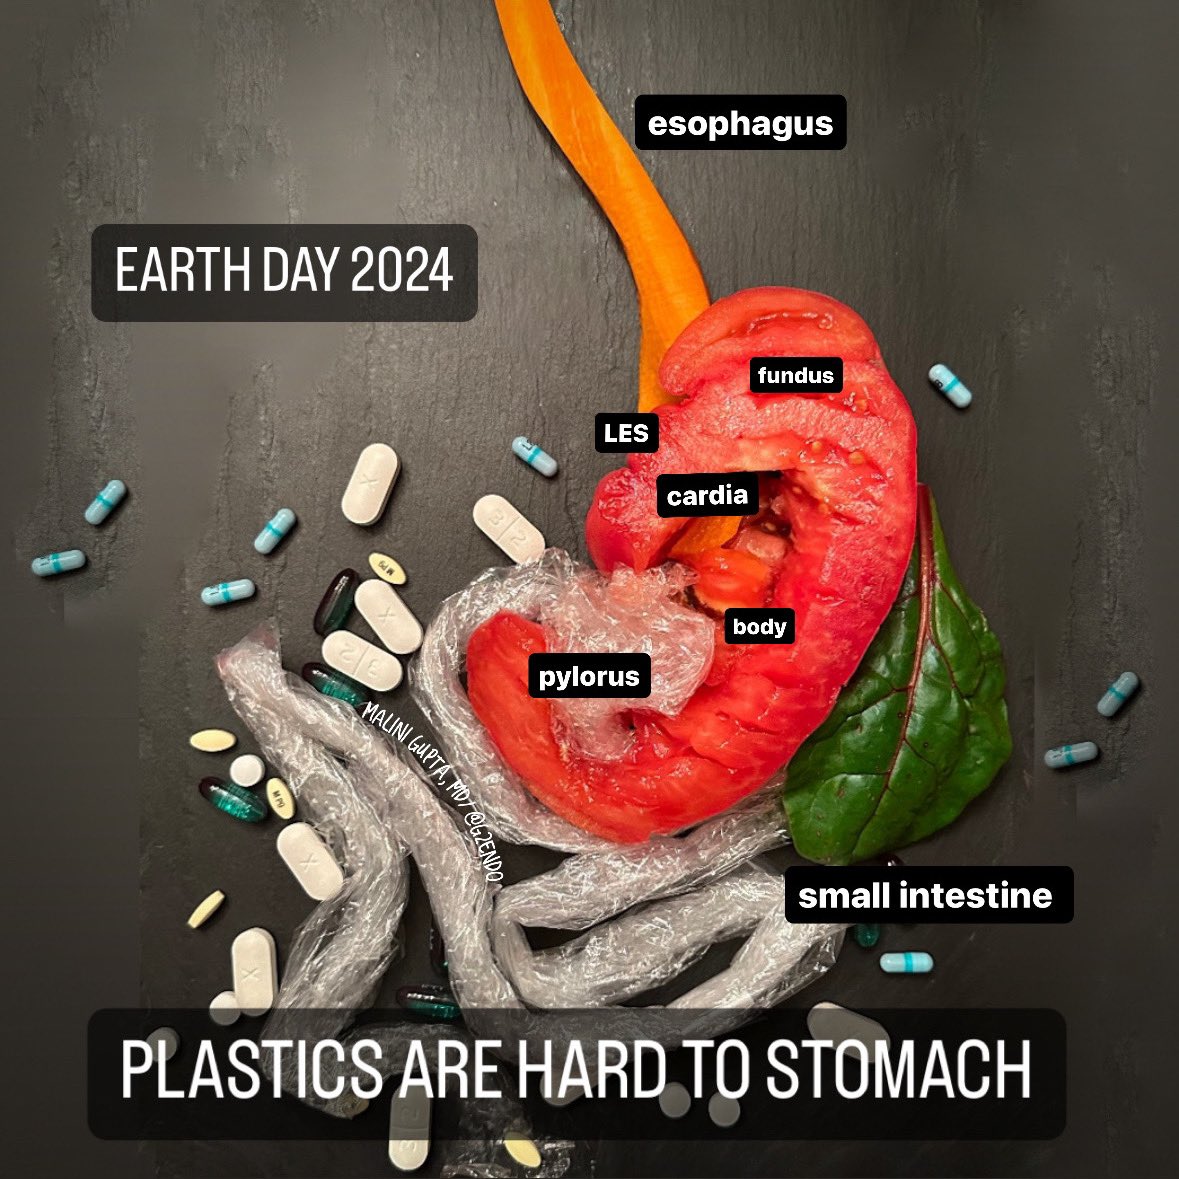 We are ingesting plastics from our food packaging, but the plastics are also harming the earth. On #EarthDay2024 go #plasticfree! #MedEd #Endocrinology